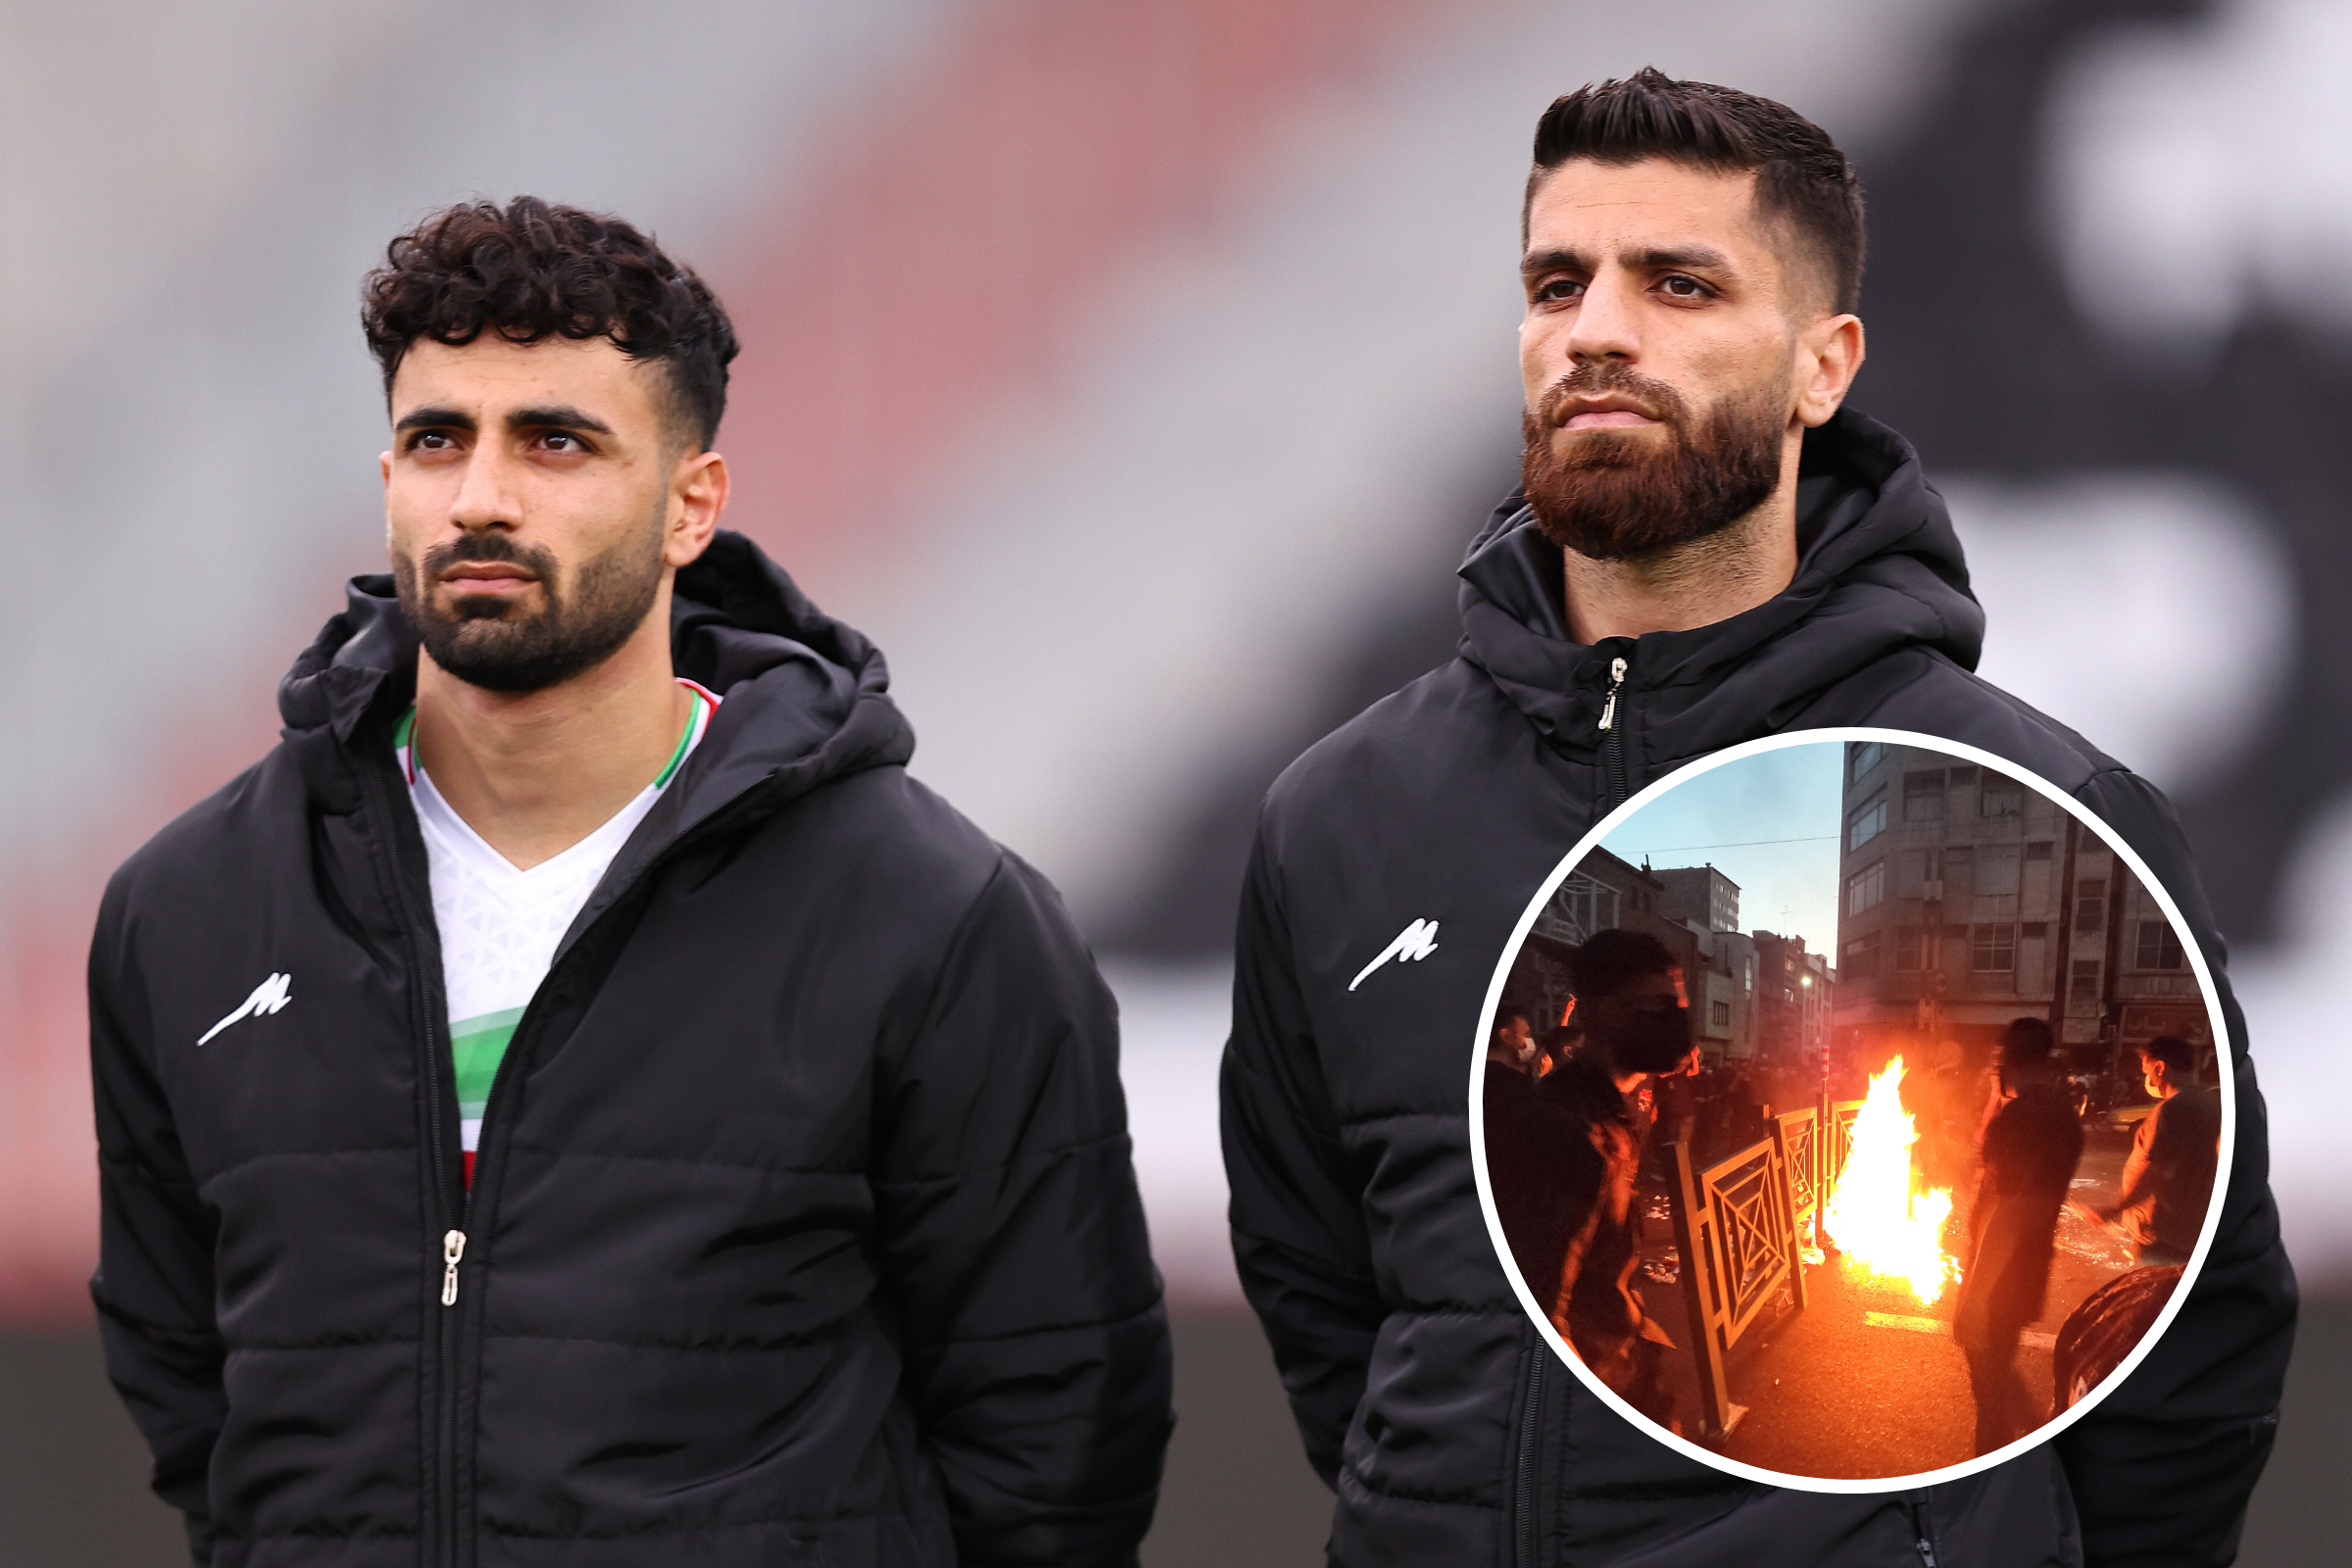 Did Iran's Soccer Team Cover Emblems in Protest Against Government?